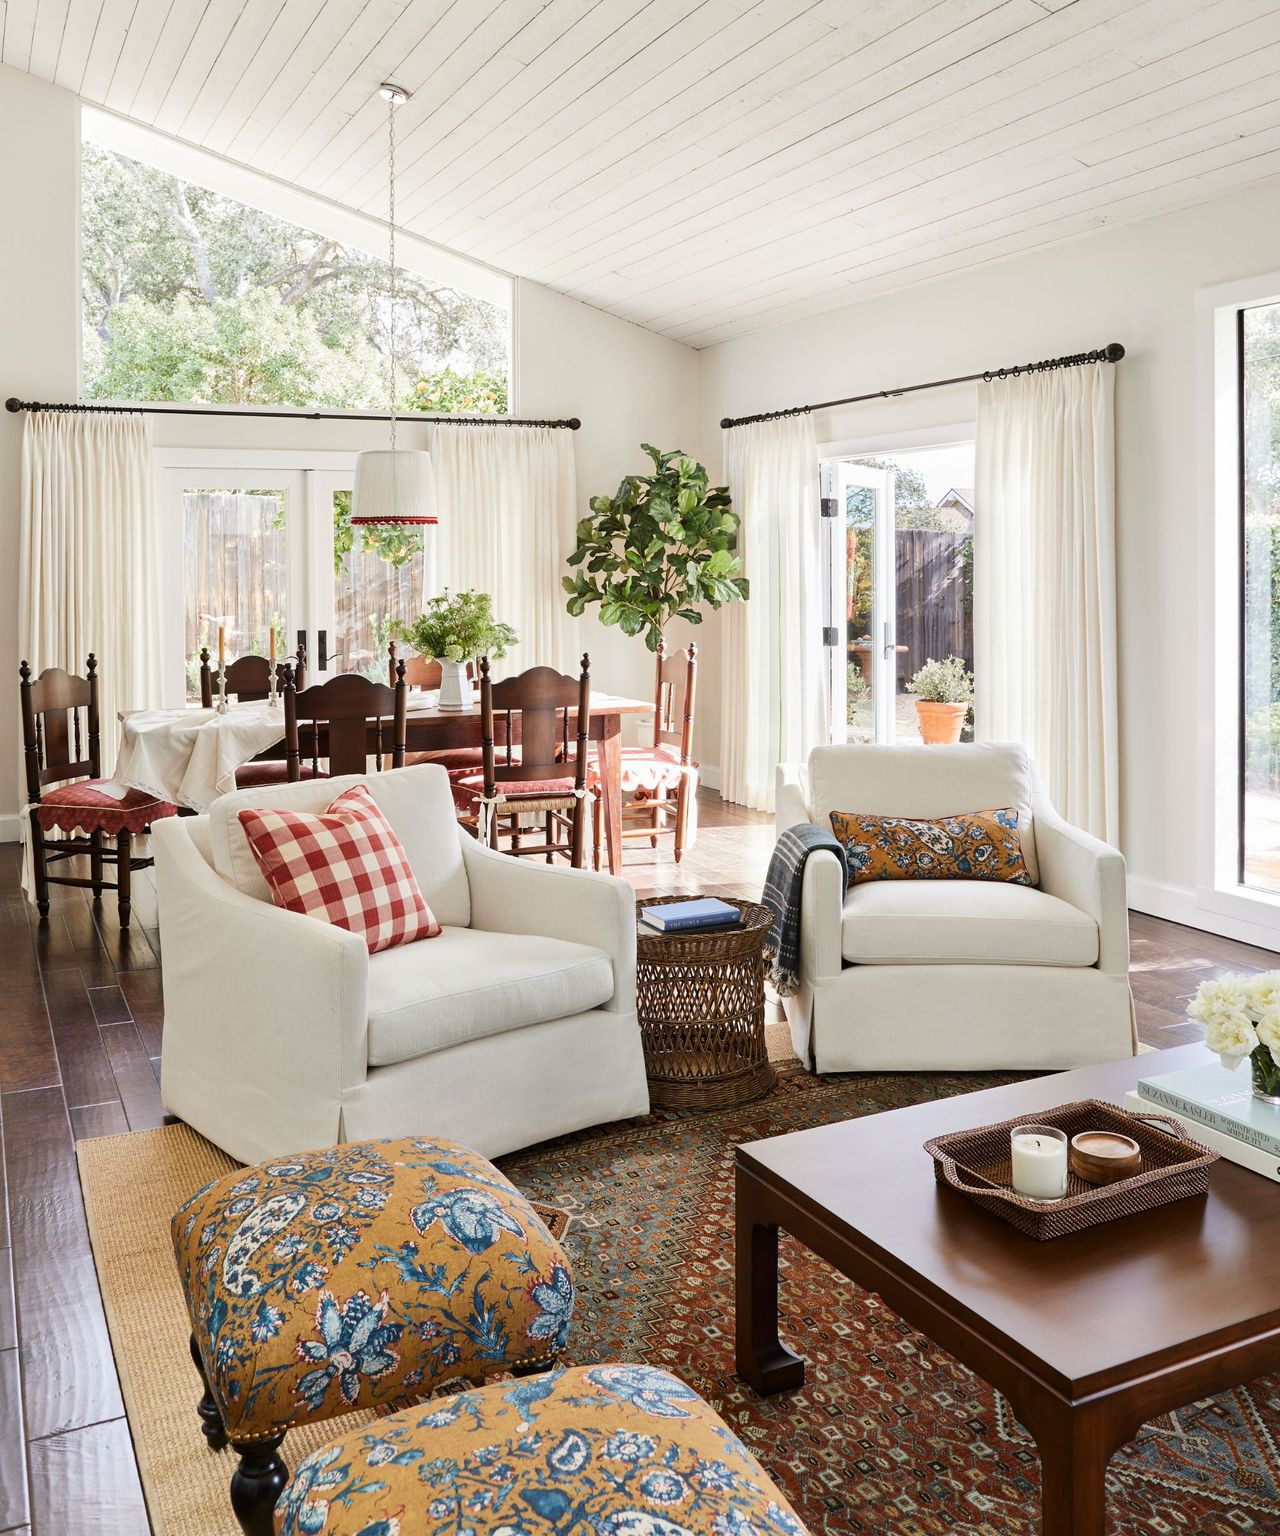 Coastal and traditional style combine in this Montecito home